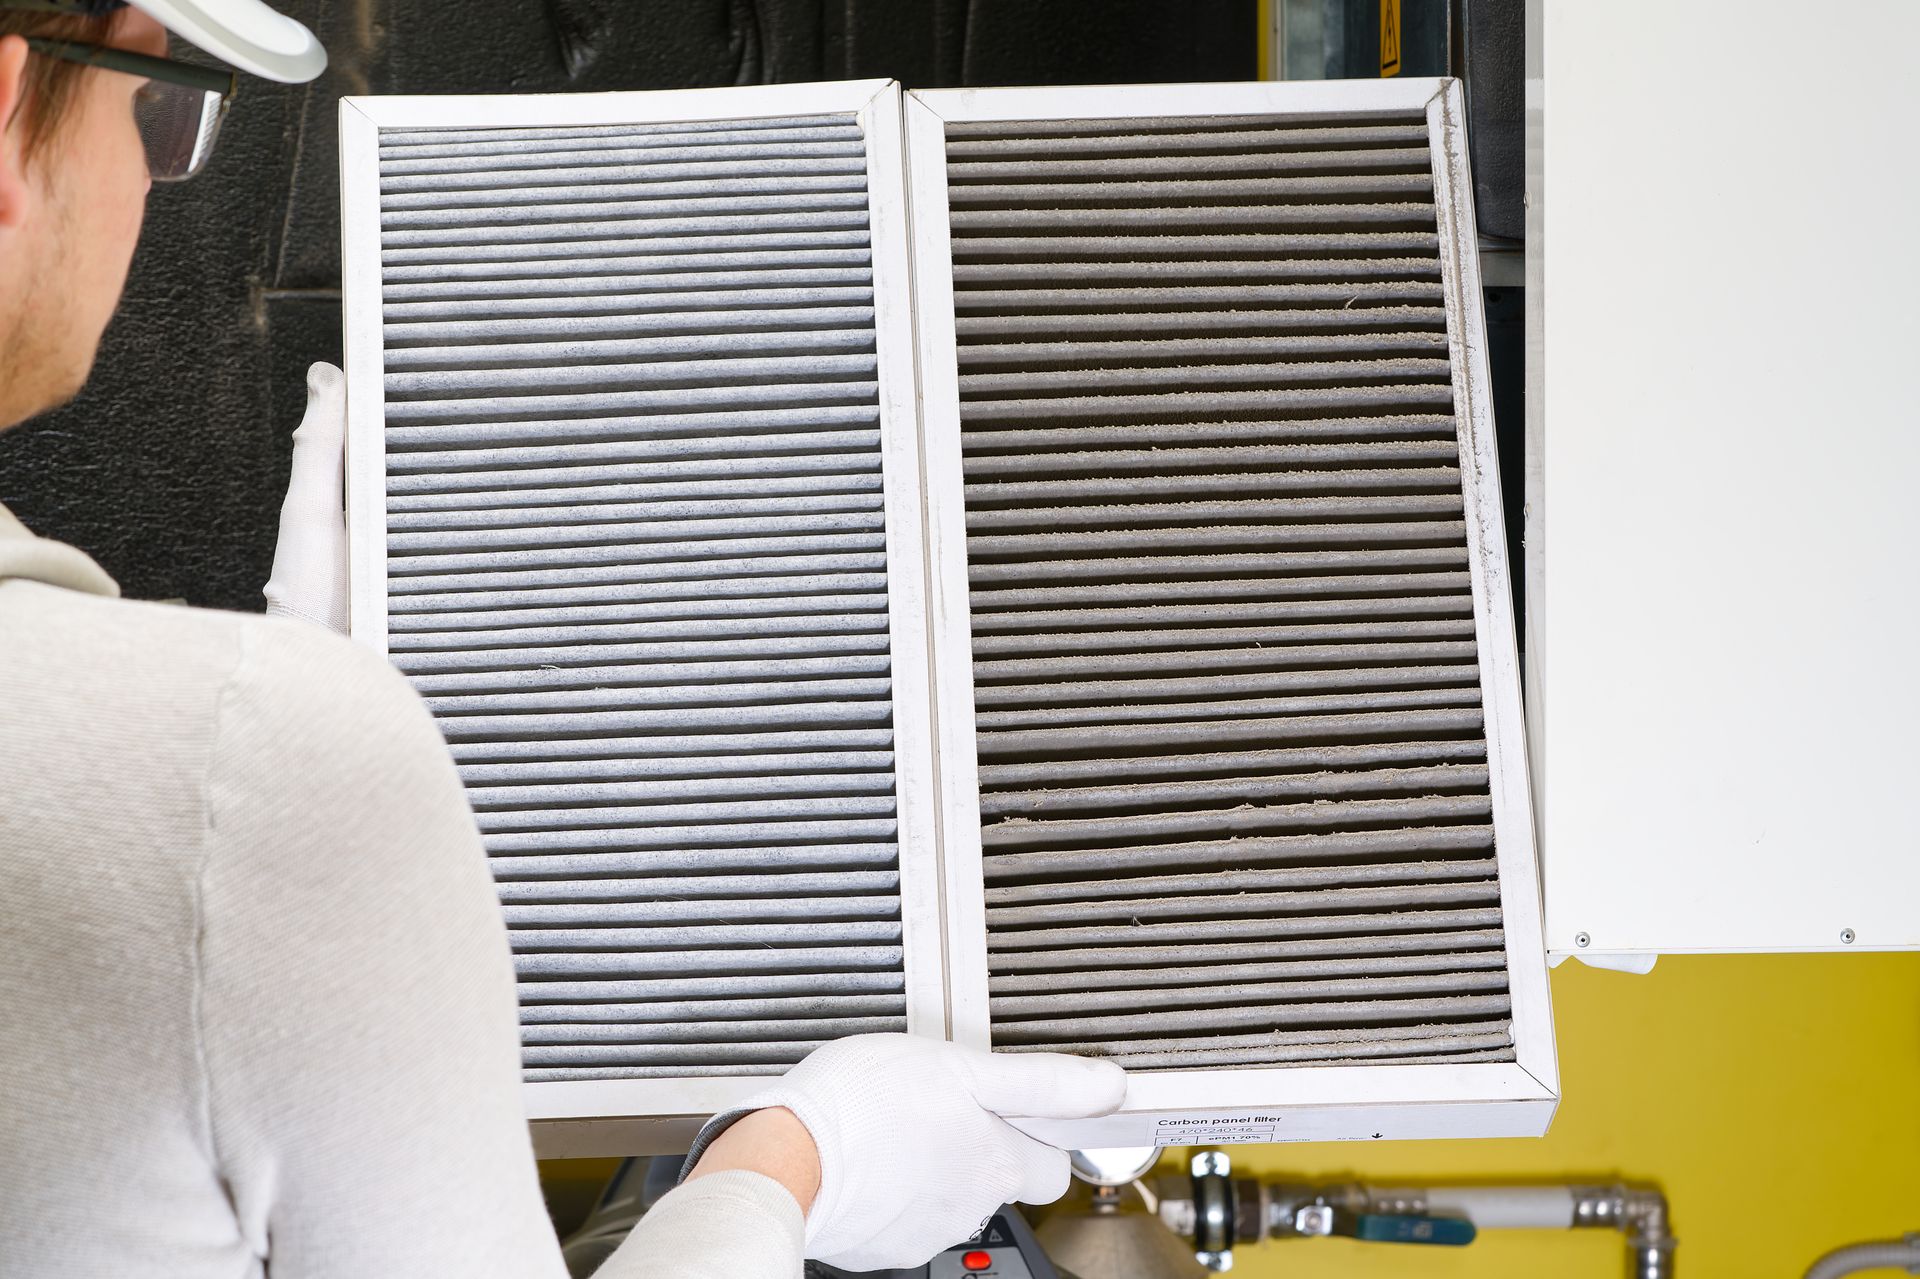 An HVAC technician performing routine maintenance by replacing the filter in a central ventilation system.